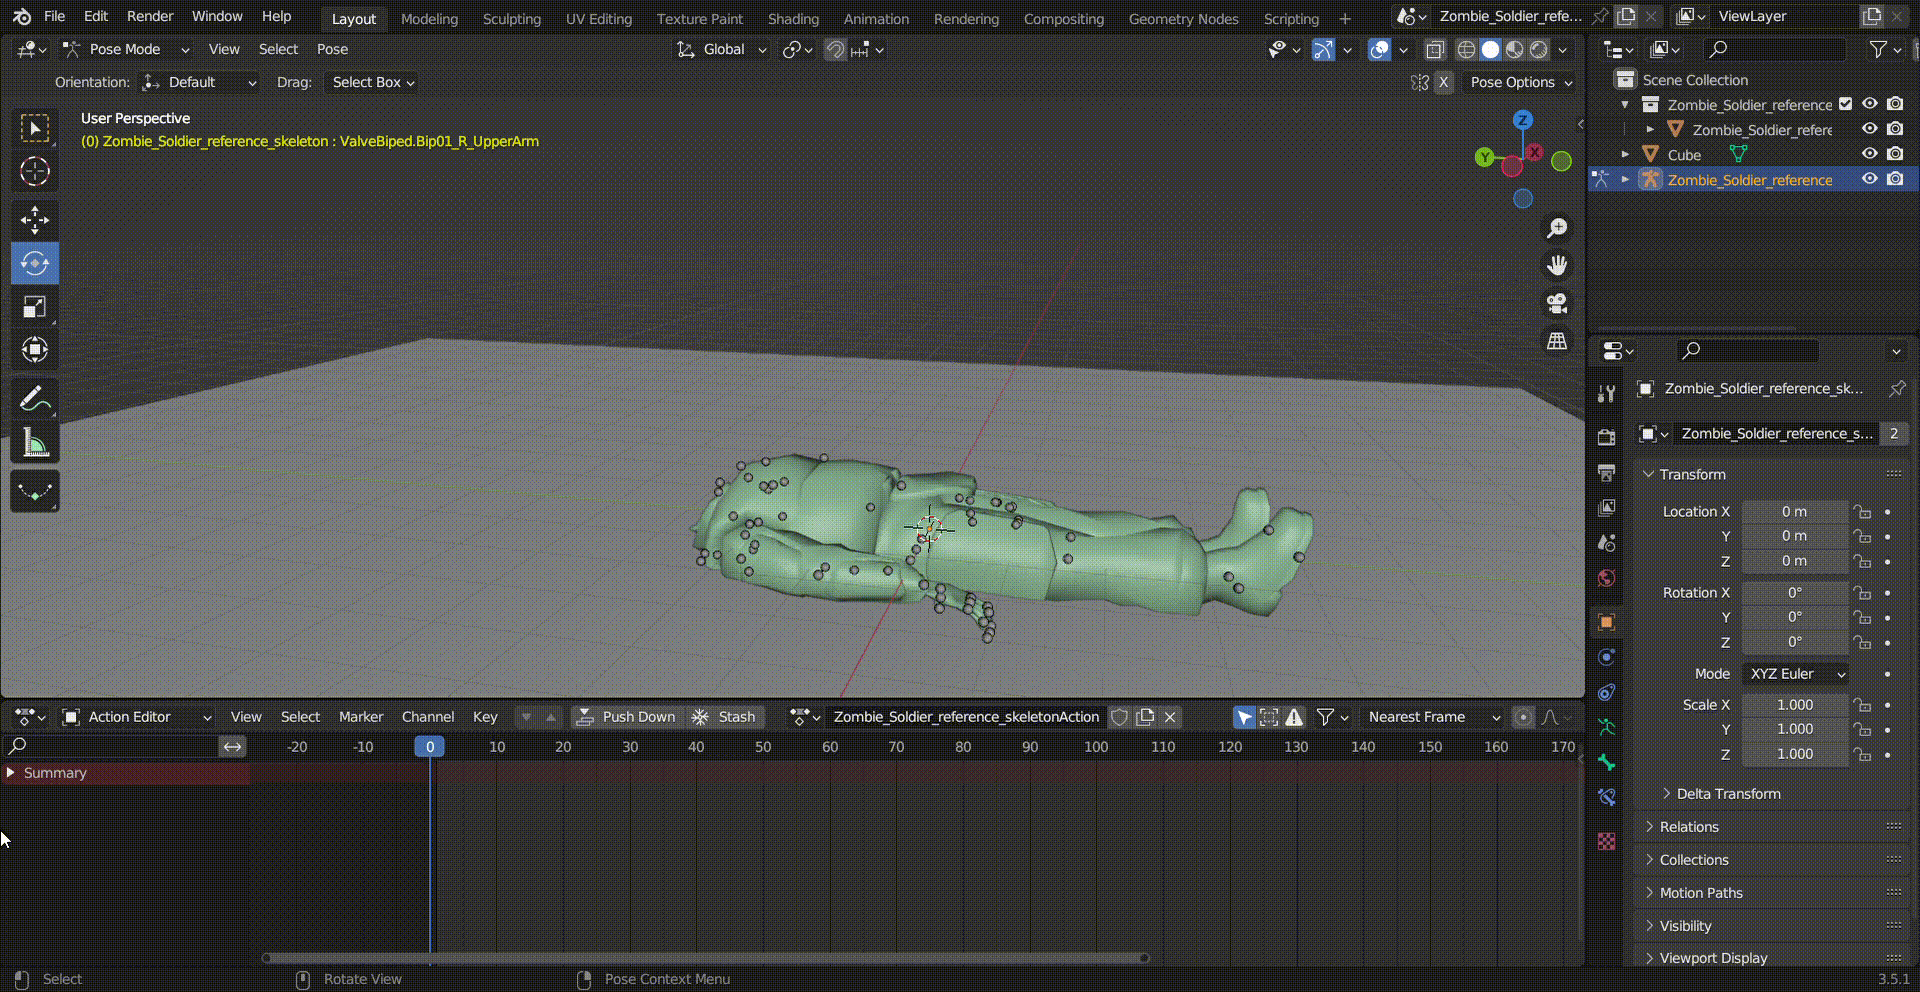 Im working on my 1st custom animation for my mod (specifically some sort of 3rd slumb pose for the zombies) and i don't know how to import it when it's ready since there isn't a tutorial on importing custom animations to source.

Any help?